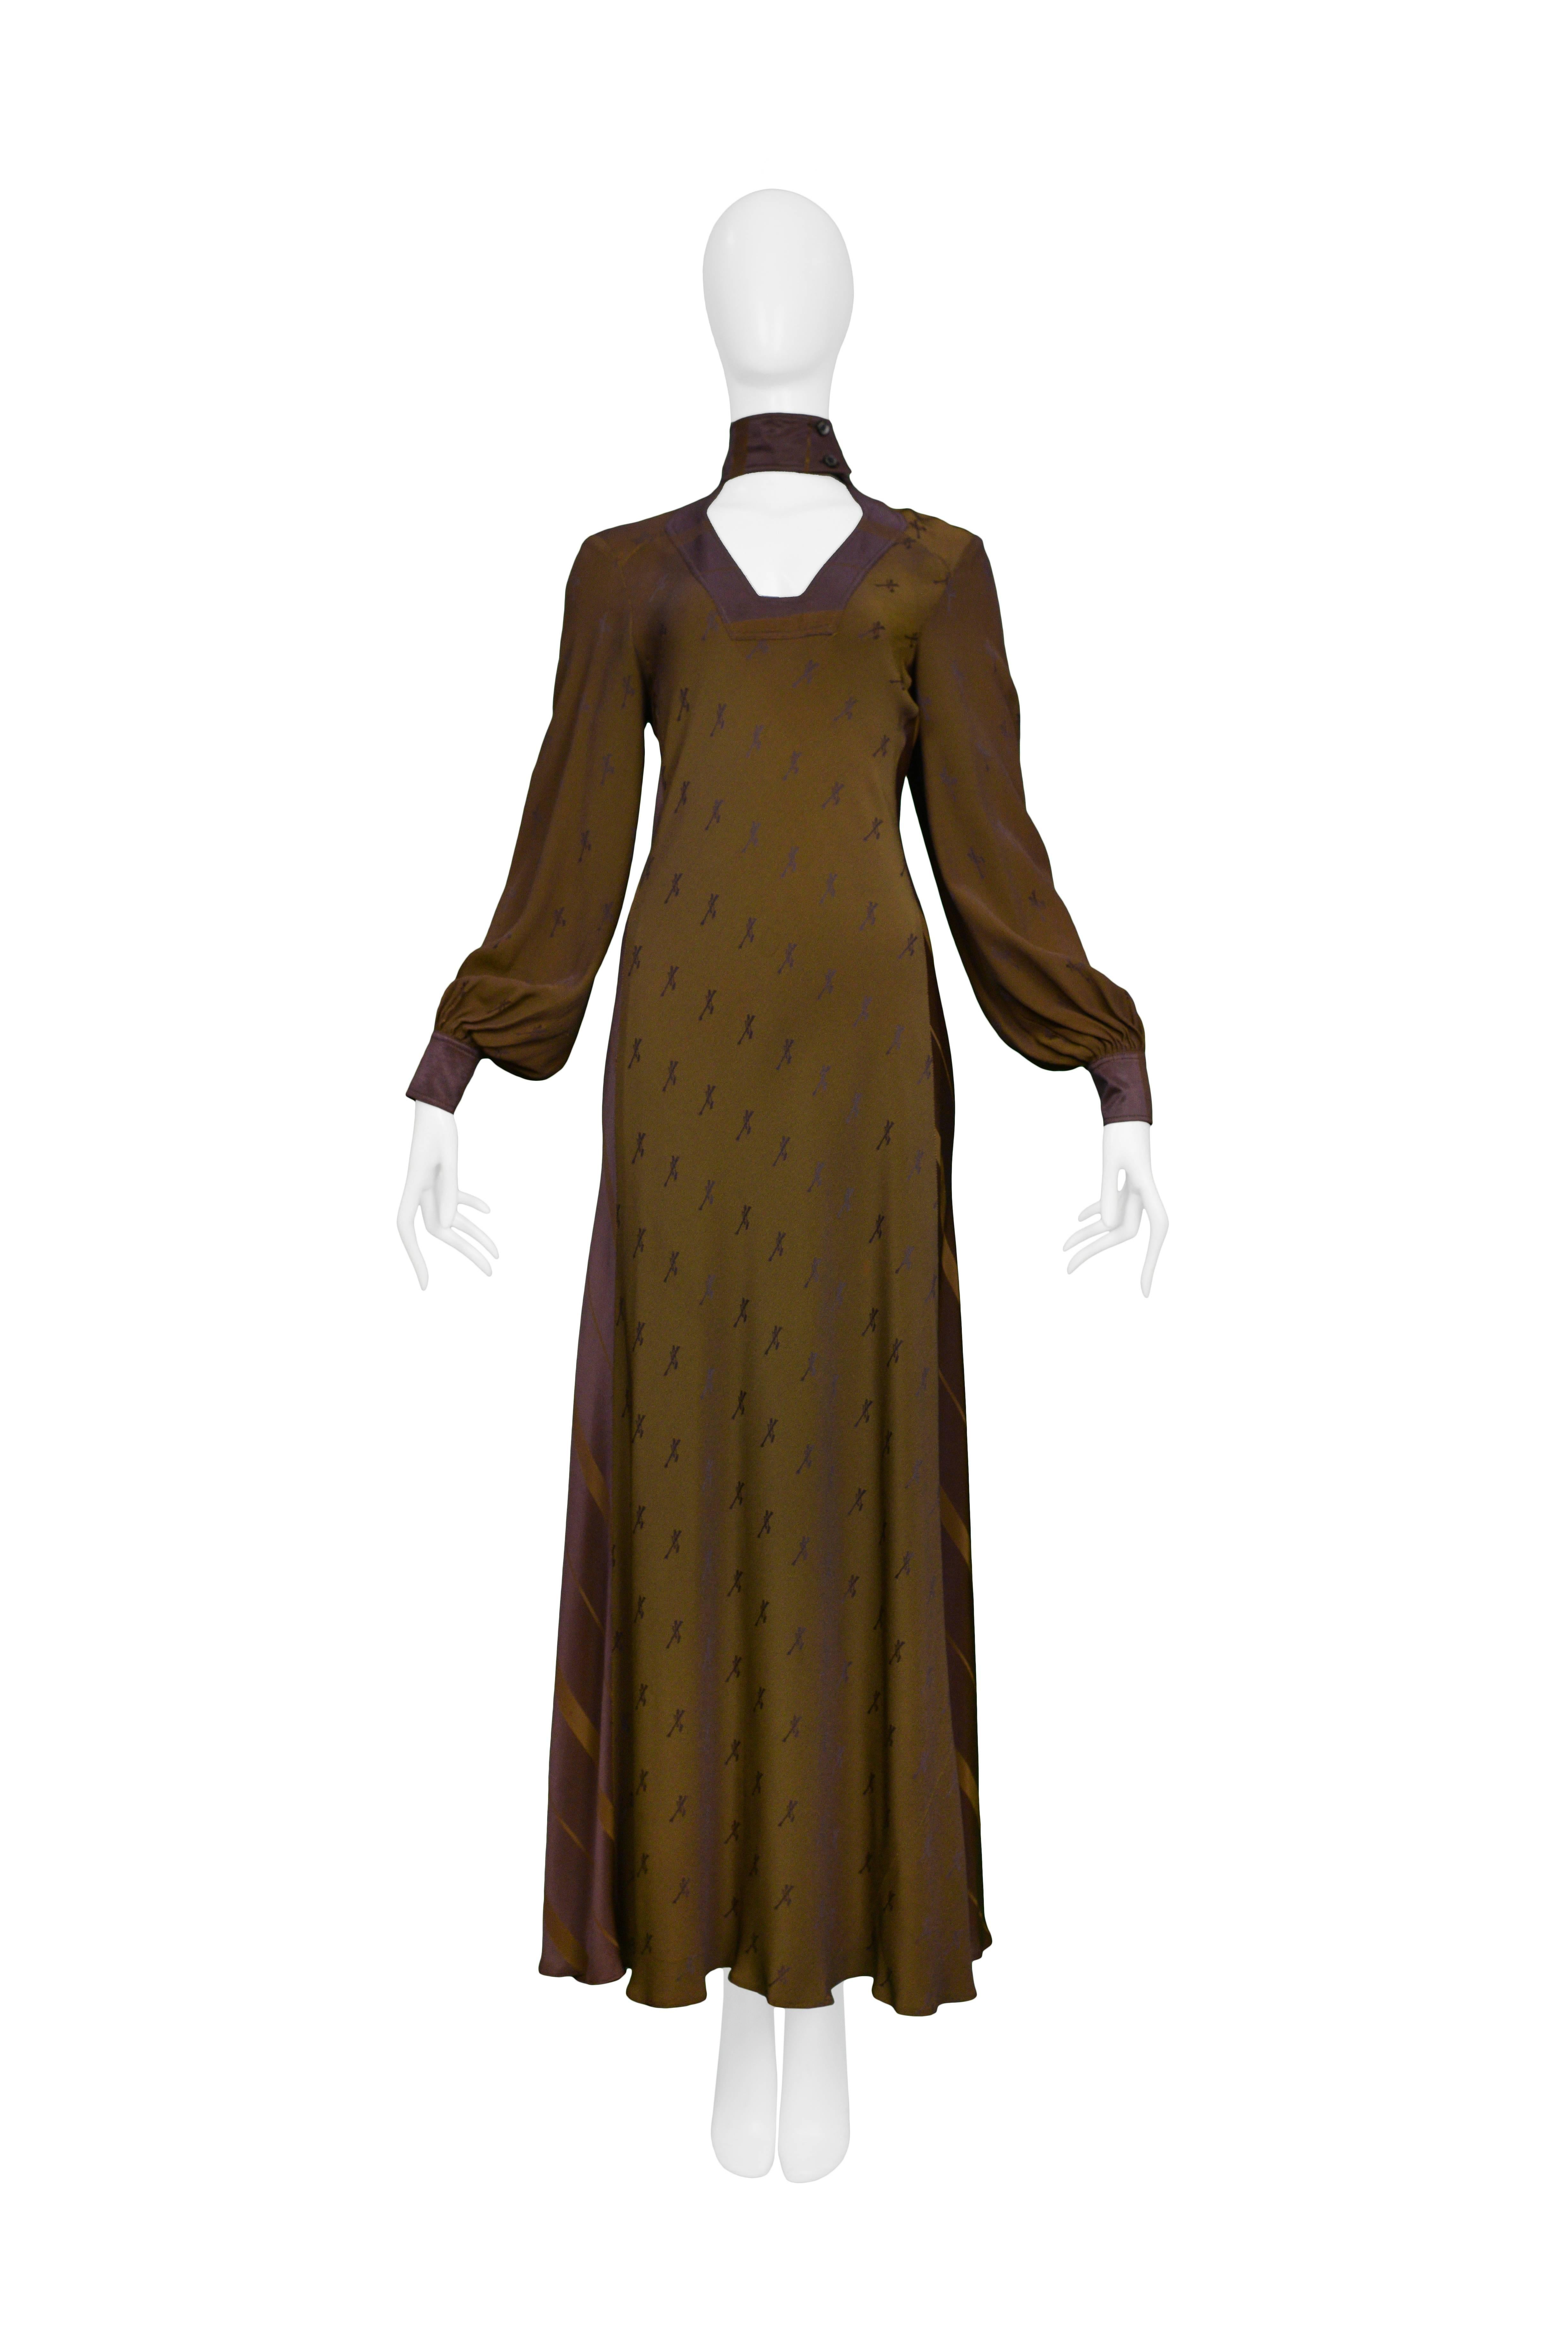 TWO TONE CAMEO GOWN 1978
Condition : Excellent Vintage Condition
A rare and unusual Alice Pollock two tone purple and brown iridescent gown. The dress features a damask woven print, button cameo collar, and maxi length. England, 1978. 